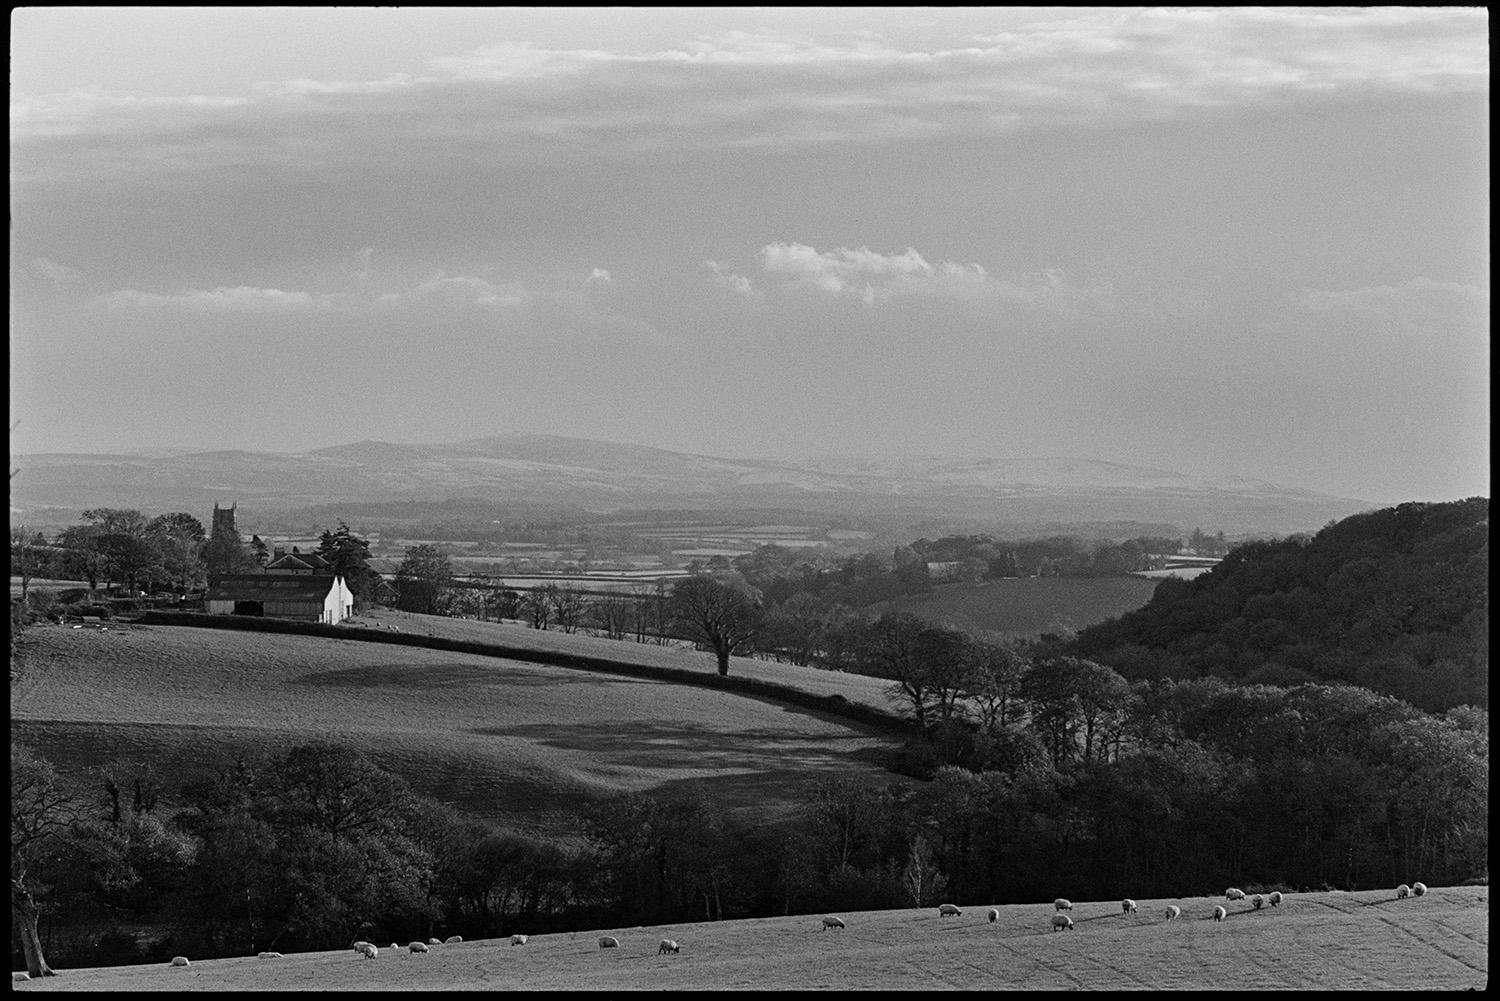 Landscape evening light with distant moor, clouds. 
[A landscape with sheep grazing in a field, trees, clouds and farm buildings at Berry, Iddesleigh. Dartmoor is visible on the horizon and Iddesleigh Church tower can also be seen.]